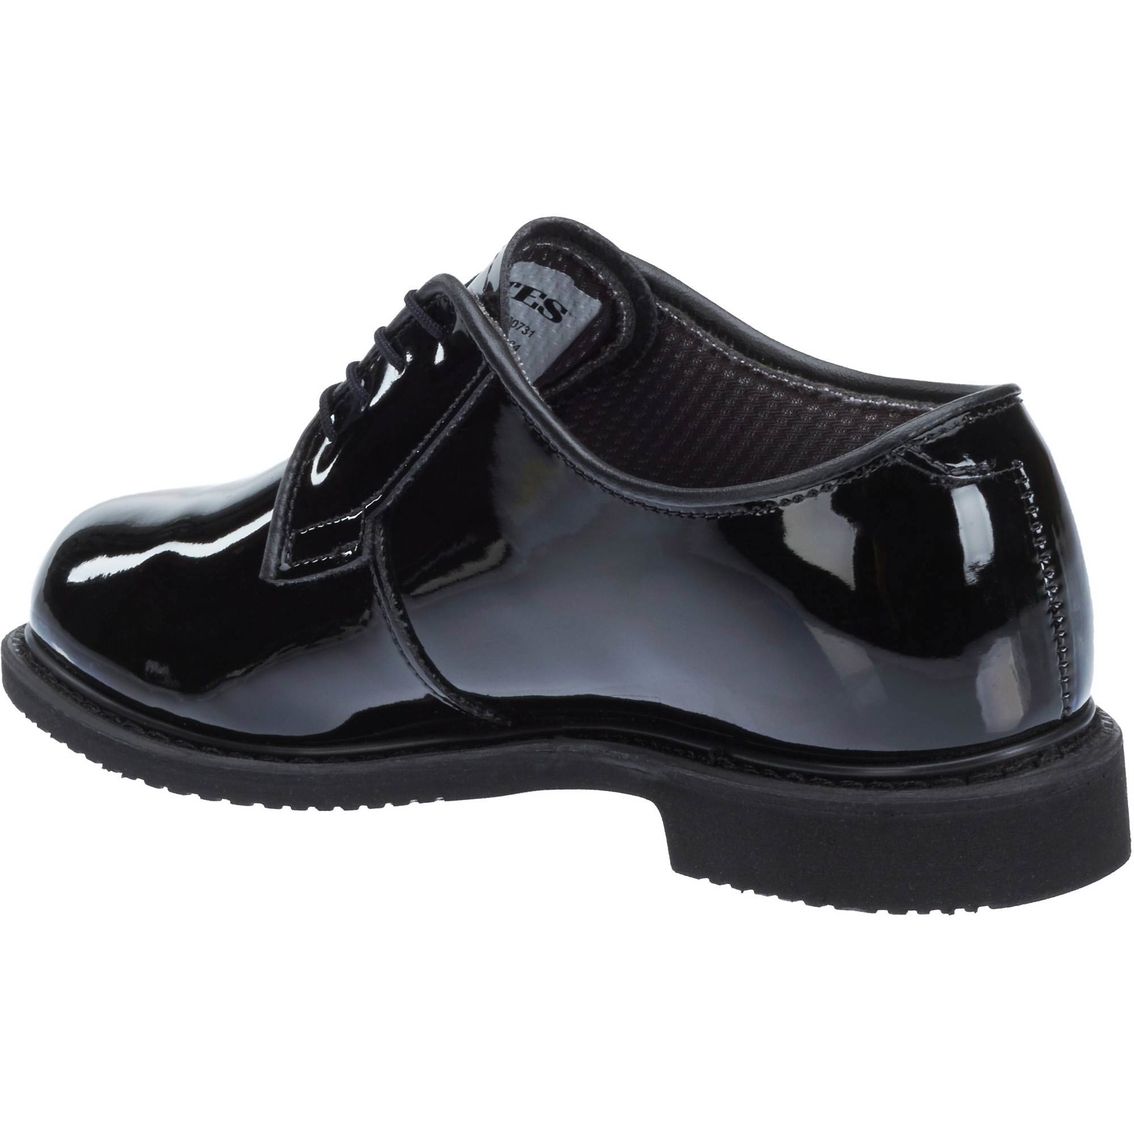 Bate Women's Black Oxford Shoes 731 - Image 3 of 8